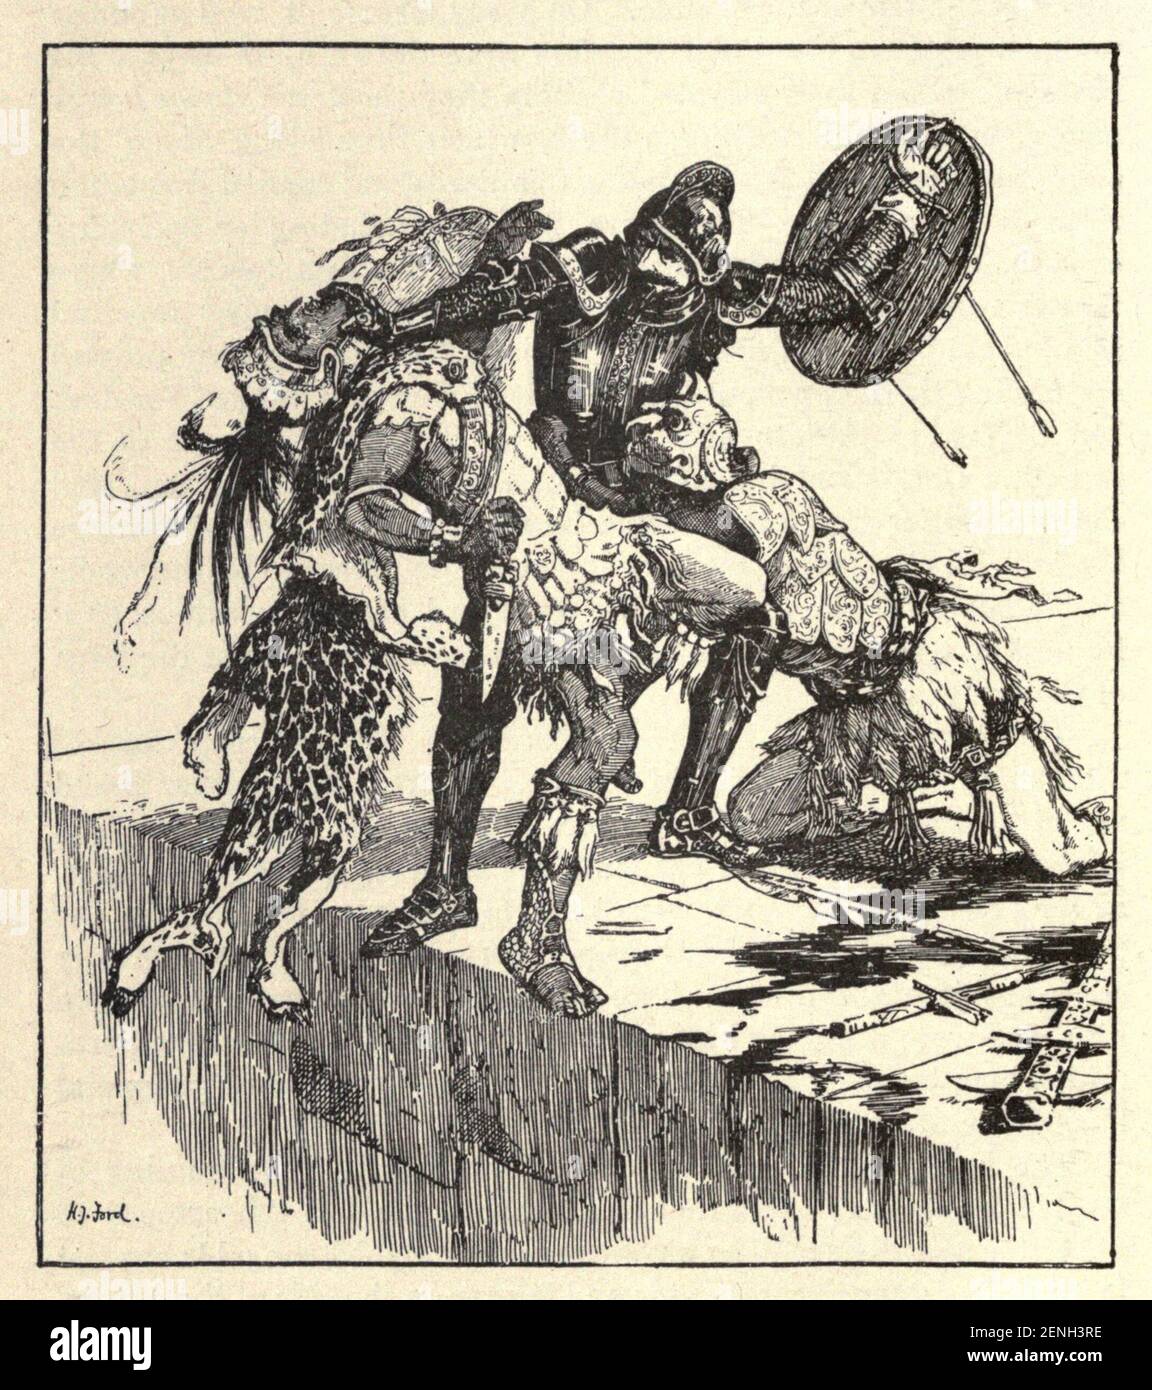 Illustrating the story ' The Conquest of Montezuma's Empire ' From the book ' The true story book ' Edited by ANDREW LANG illustrated by L. BOGLE, LUCIEN DAVIS, H. J. FORD, C. H. M. KERR, and LANCELOT SPEED. Published by Longmans, Green, and Co. London and New York in 1893 Stock Photo